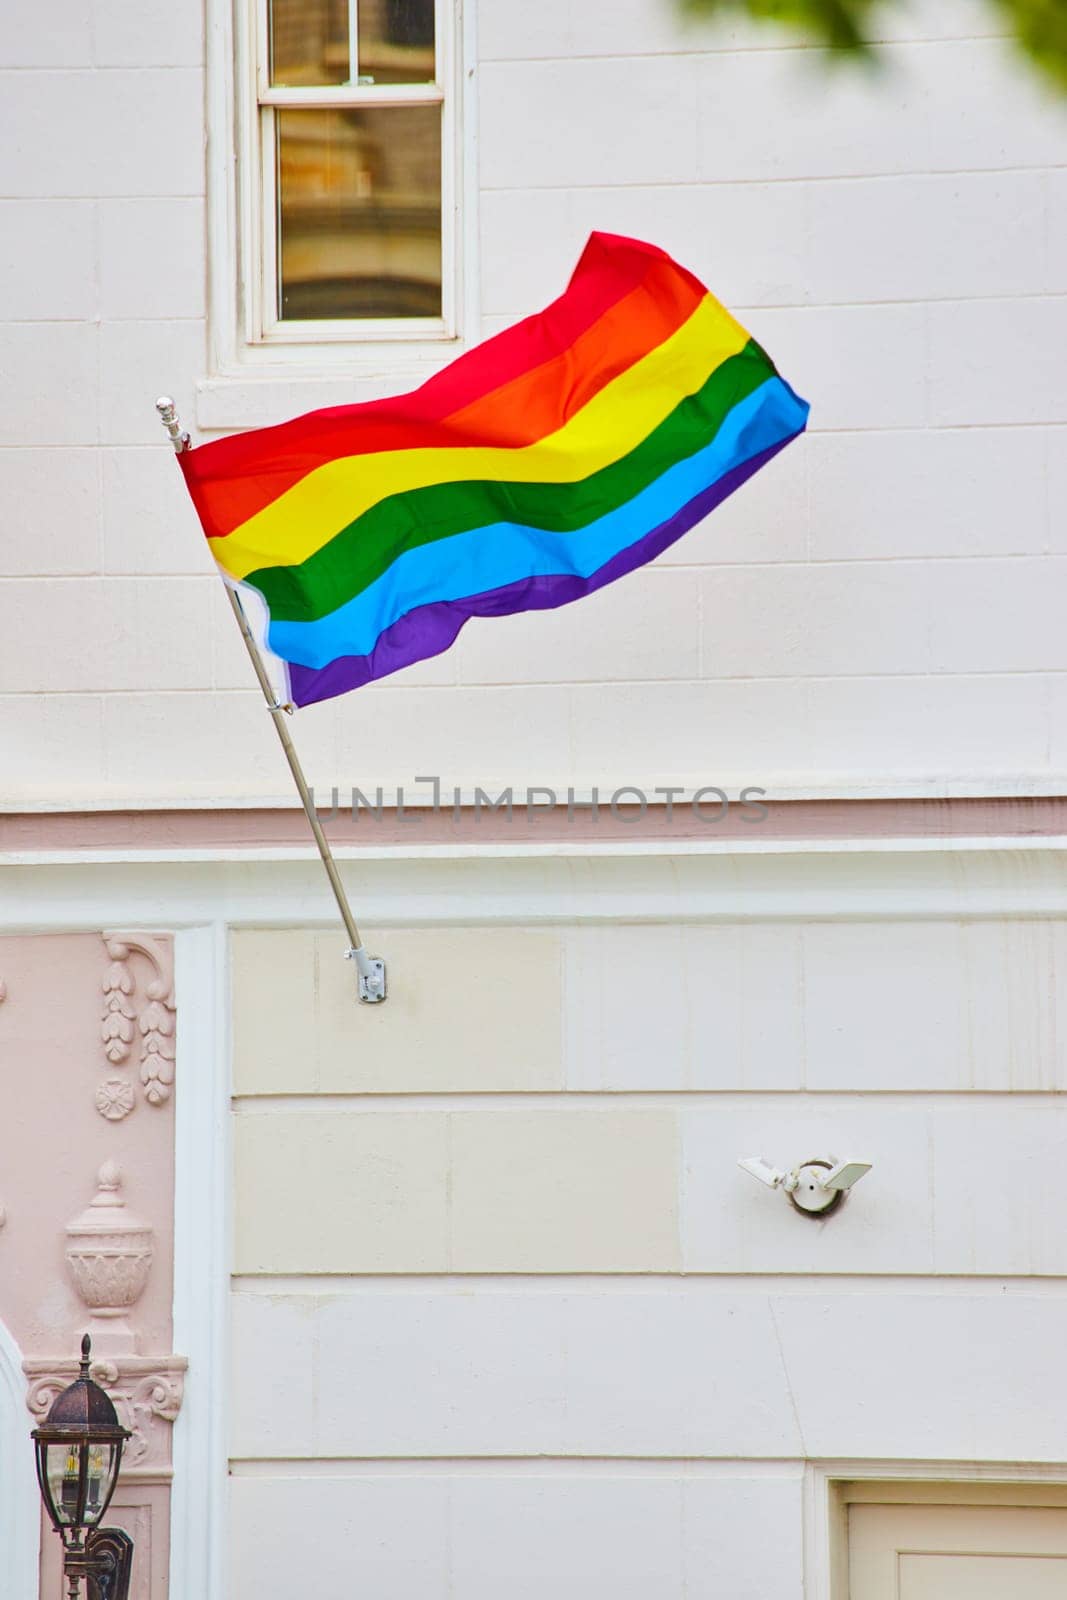 Image of Rainbow pride flag stretched out in the wind against white building with white garage